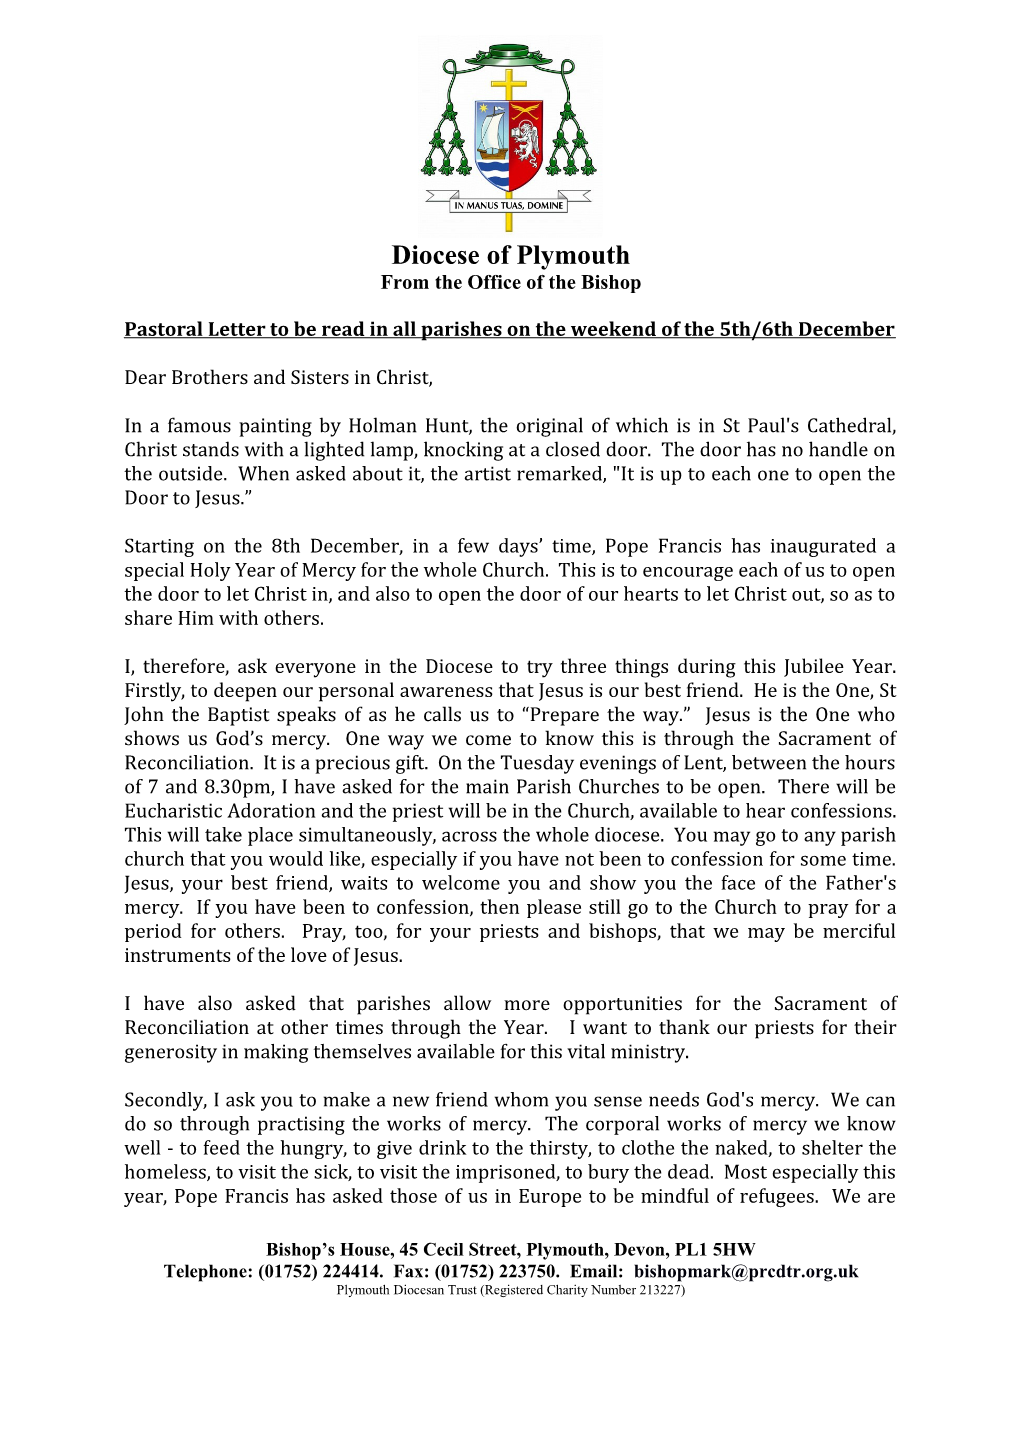 Pastoral Letter to Be Read in All Parishes on the Weekend of the 5Th/6Th December